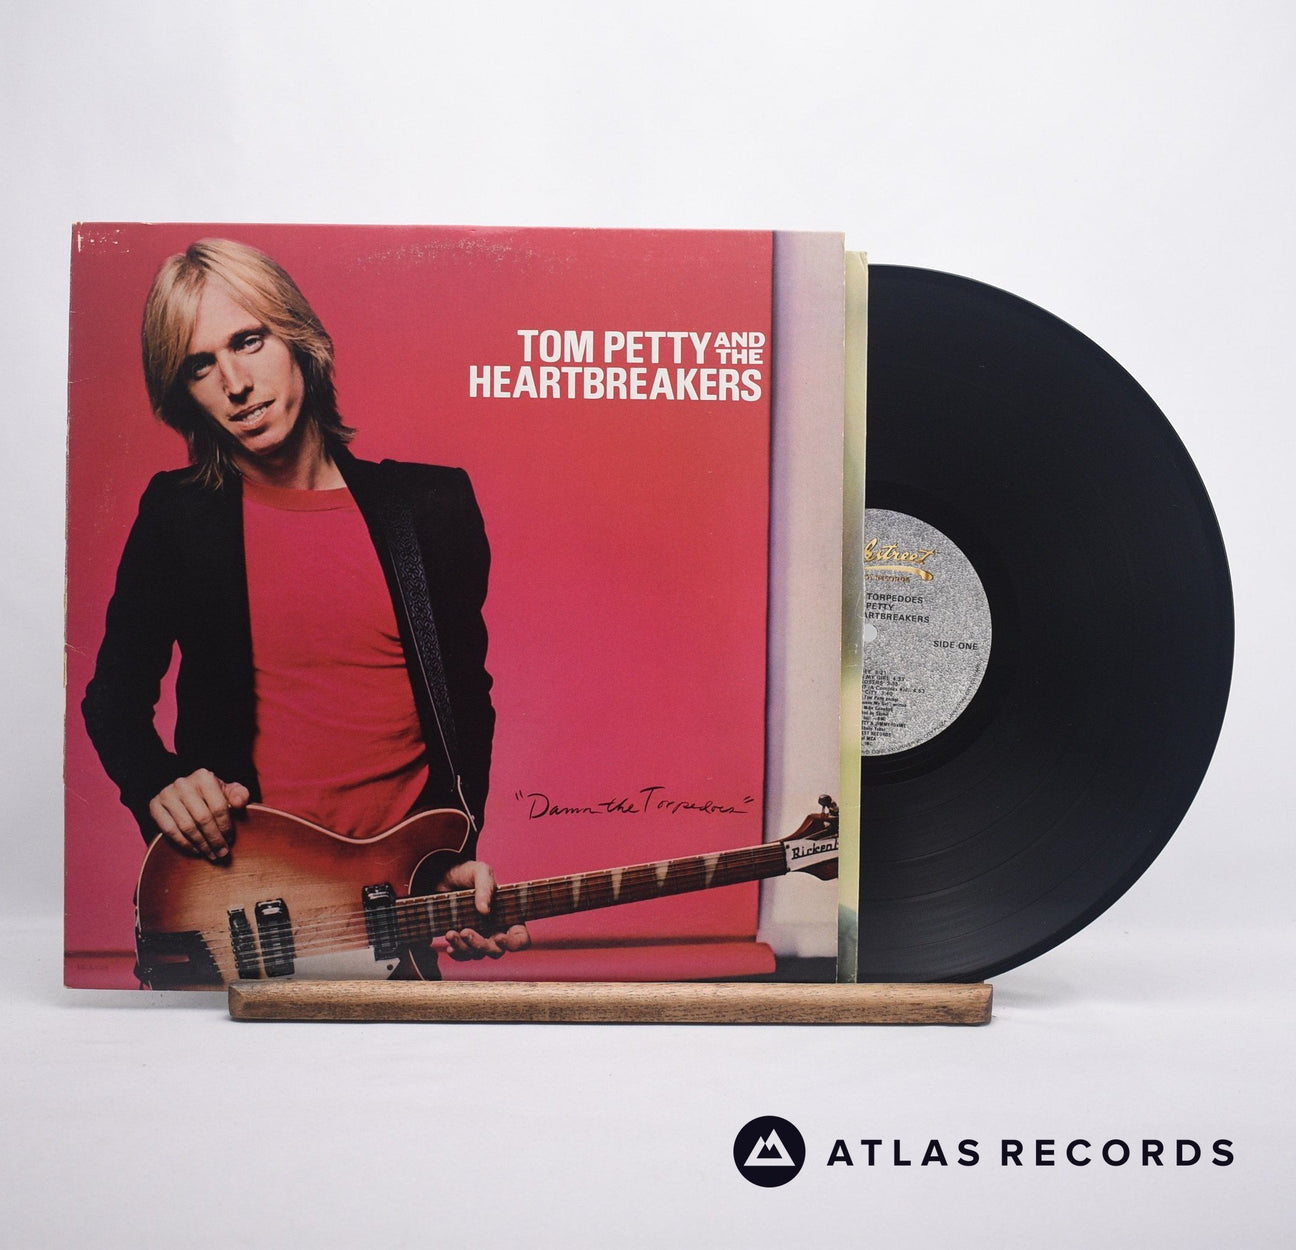 Tom Petty And The Heartbreakers Damn The Torpedoes LP Vinyl Record - Front Cover & Record